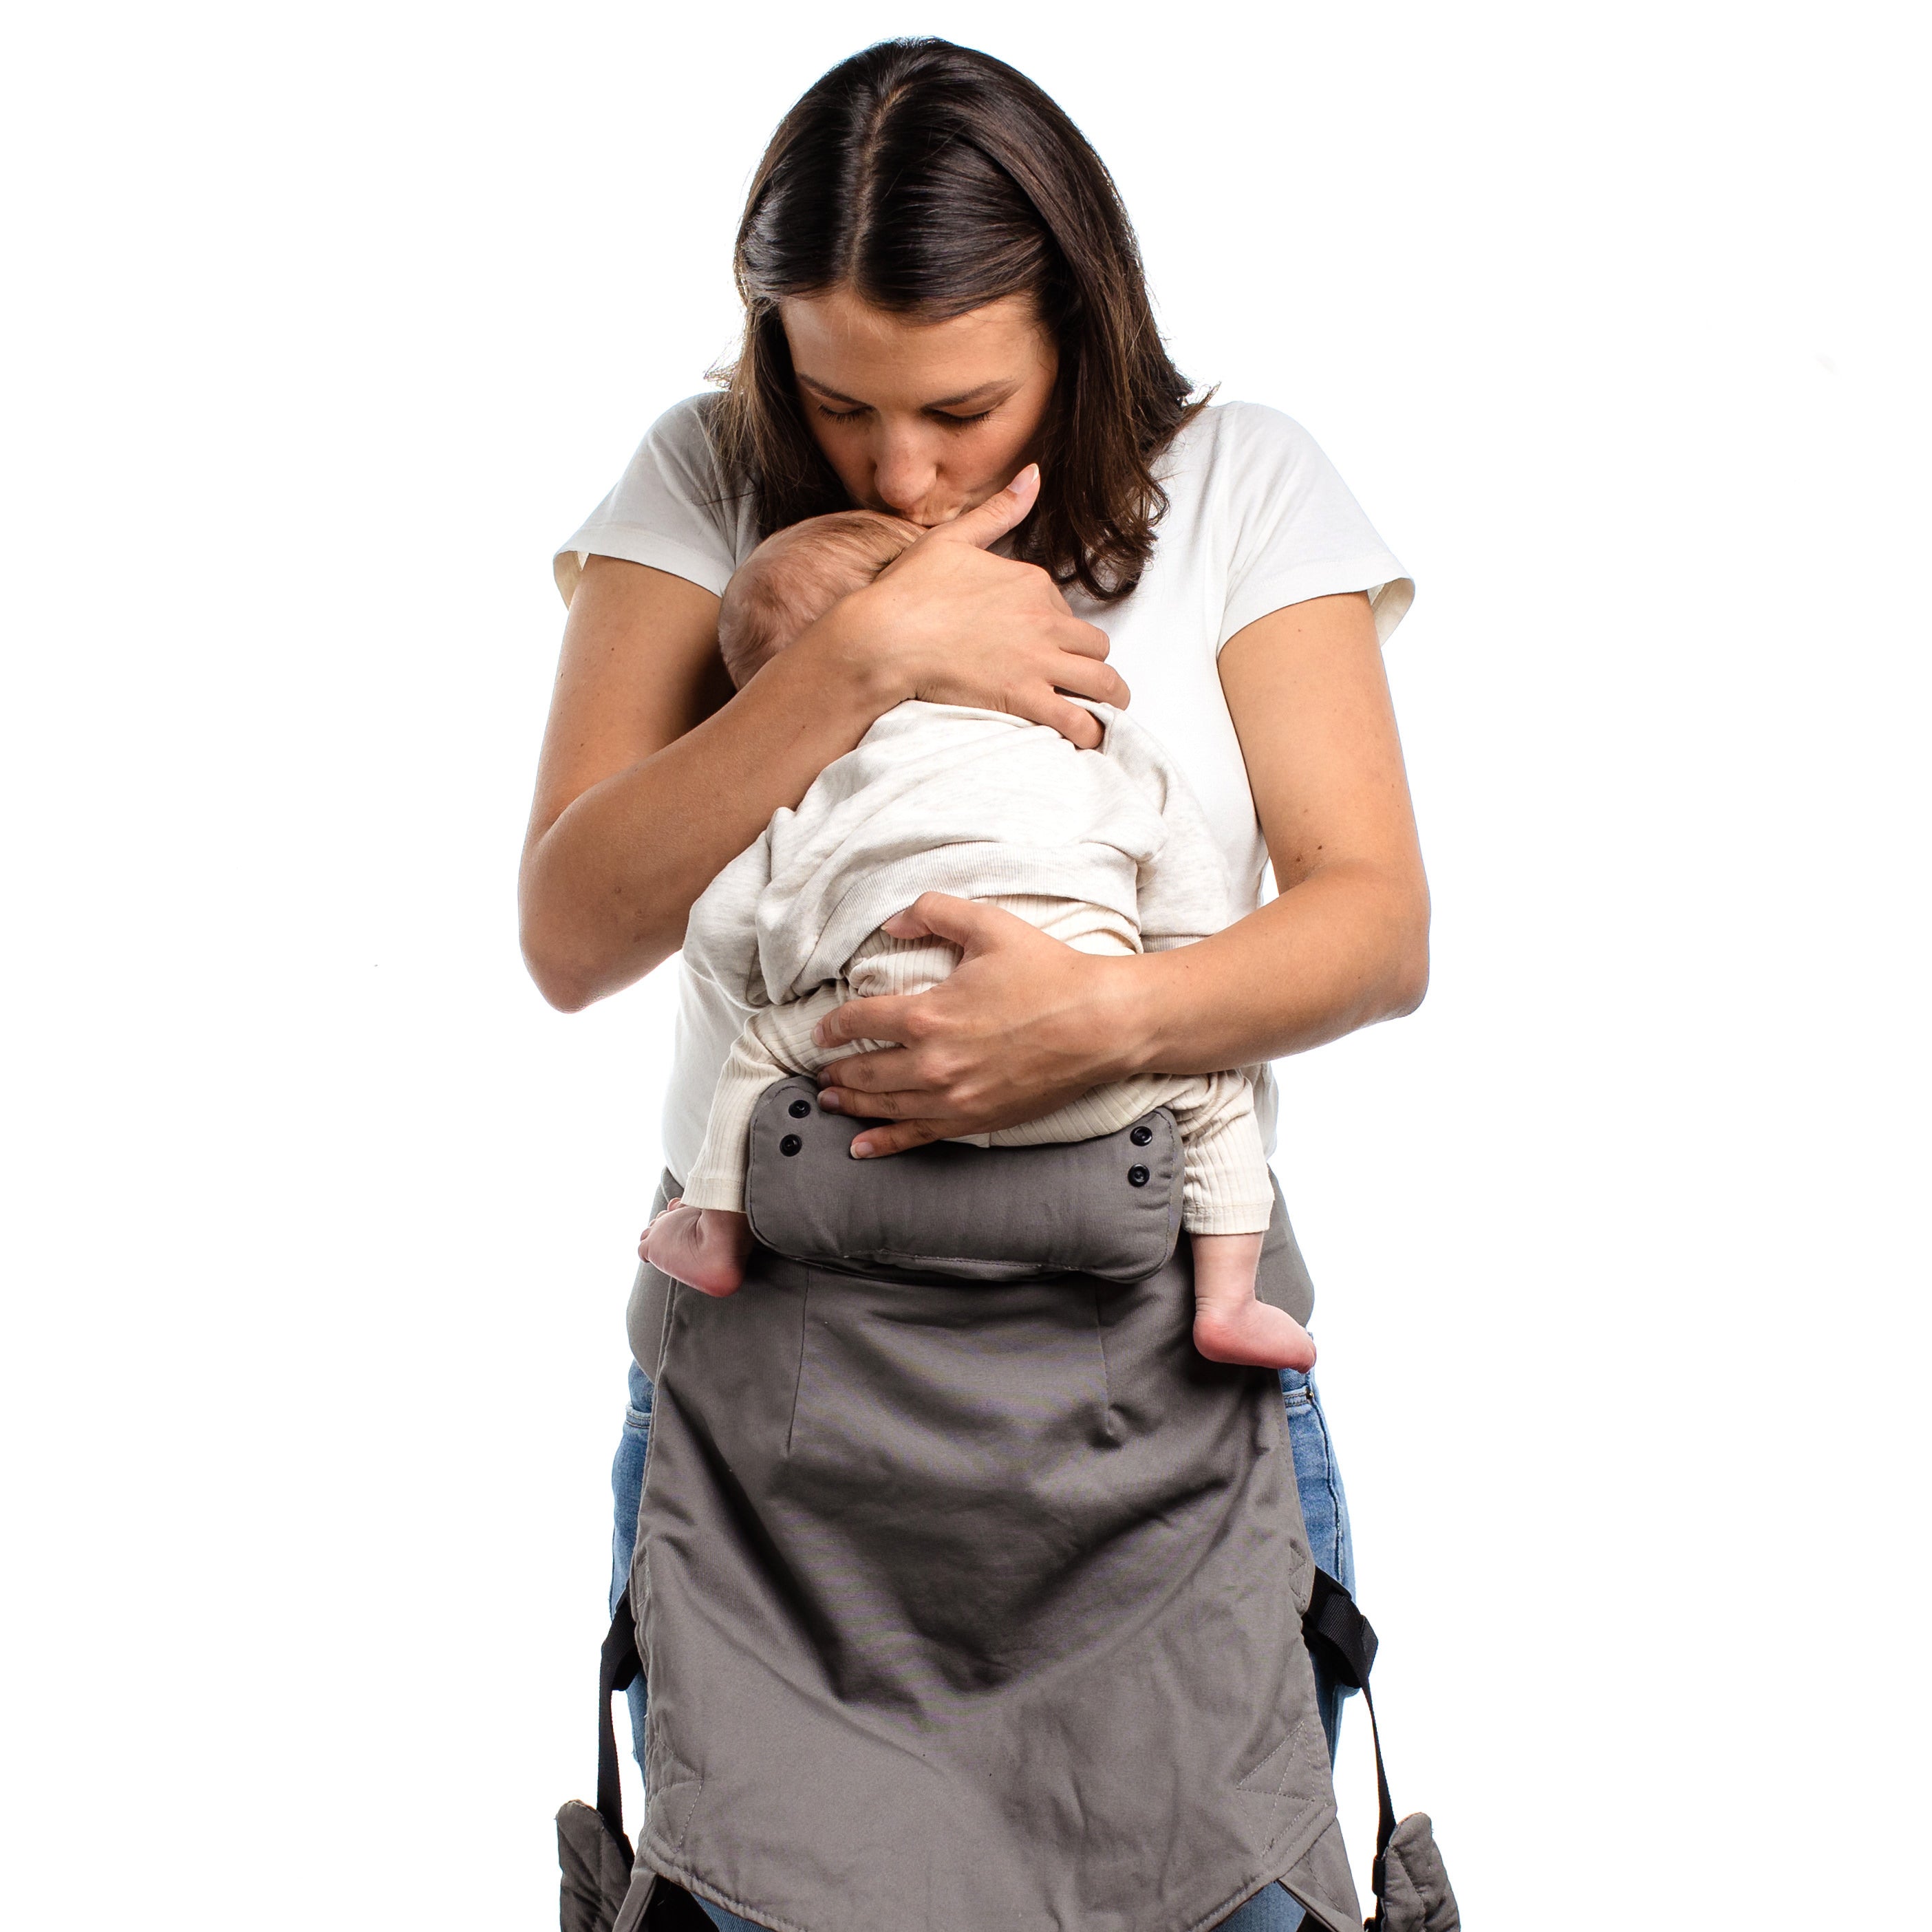 Brown haired mom is holding her baby on her front kissing his sleeping face as she is about to put him in a front carry ergonomic position in the boba 4gs classic carrier using the infant insert.